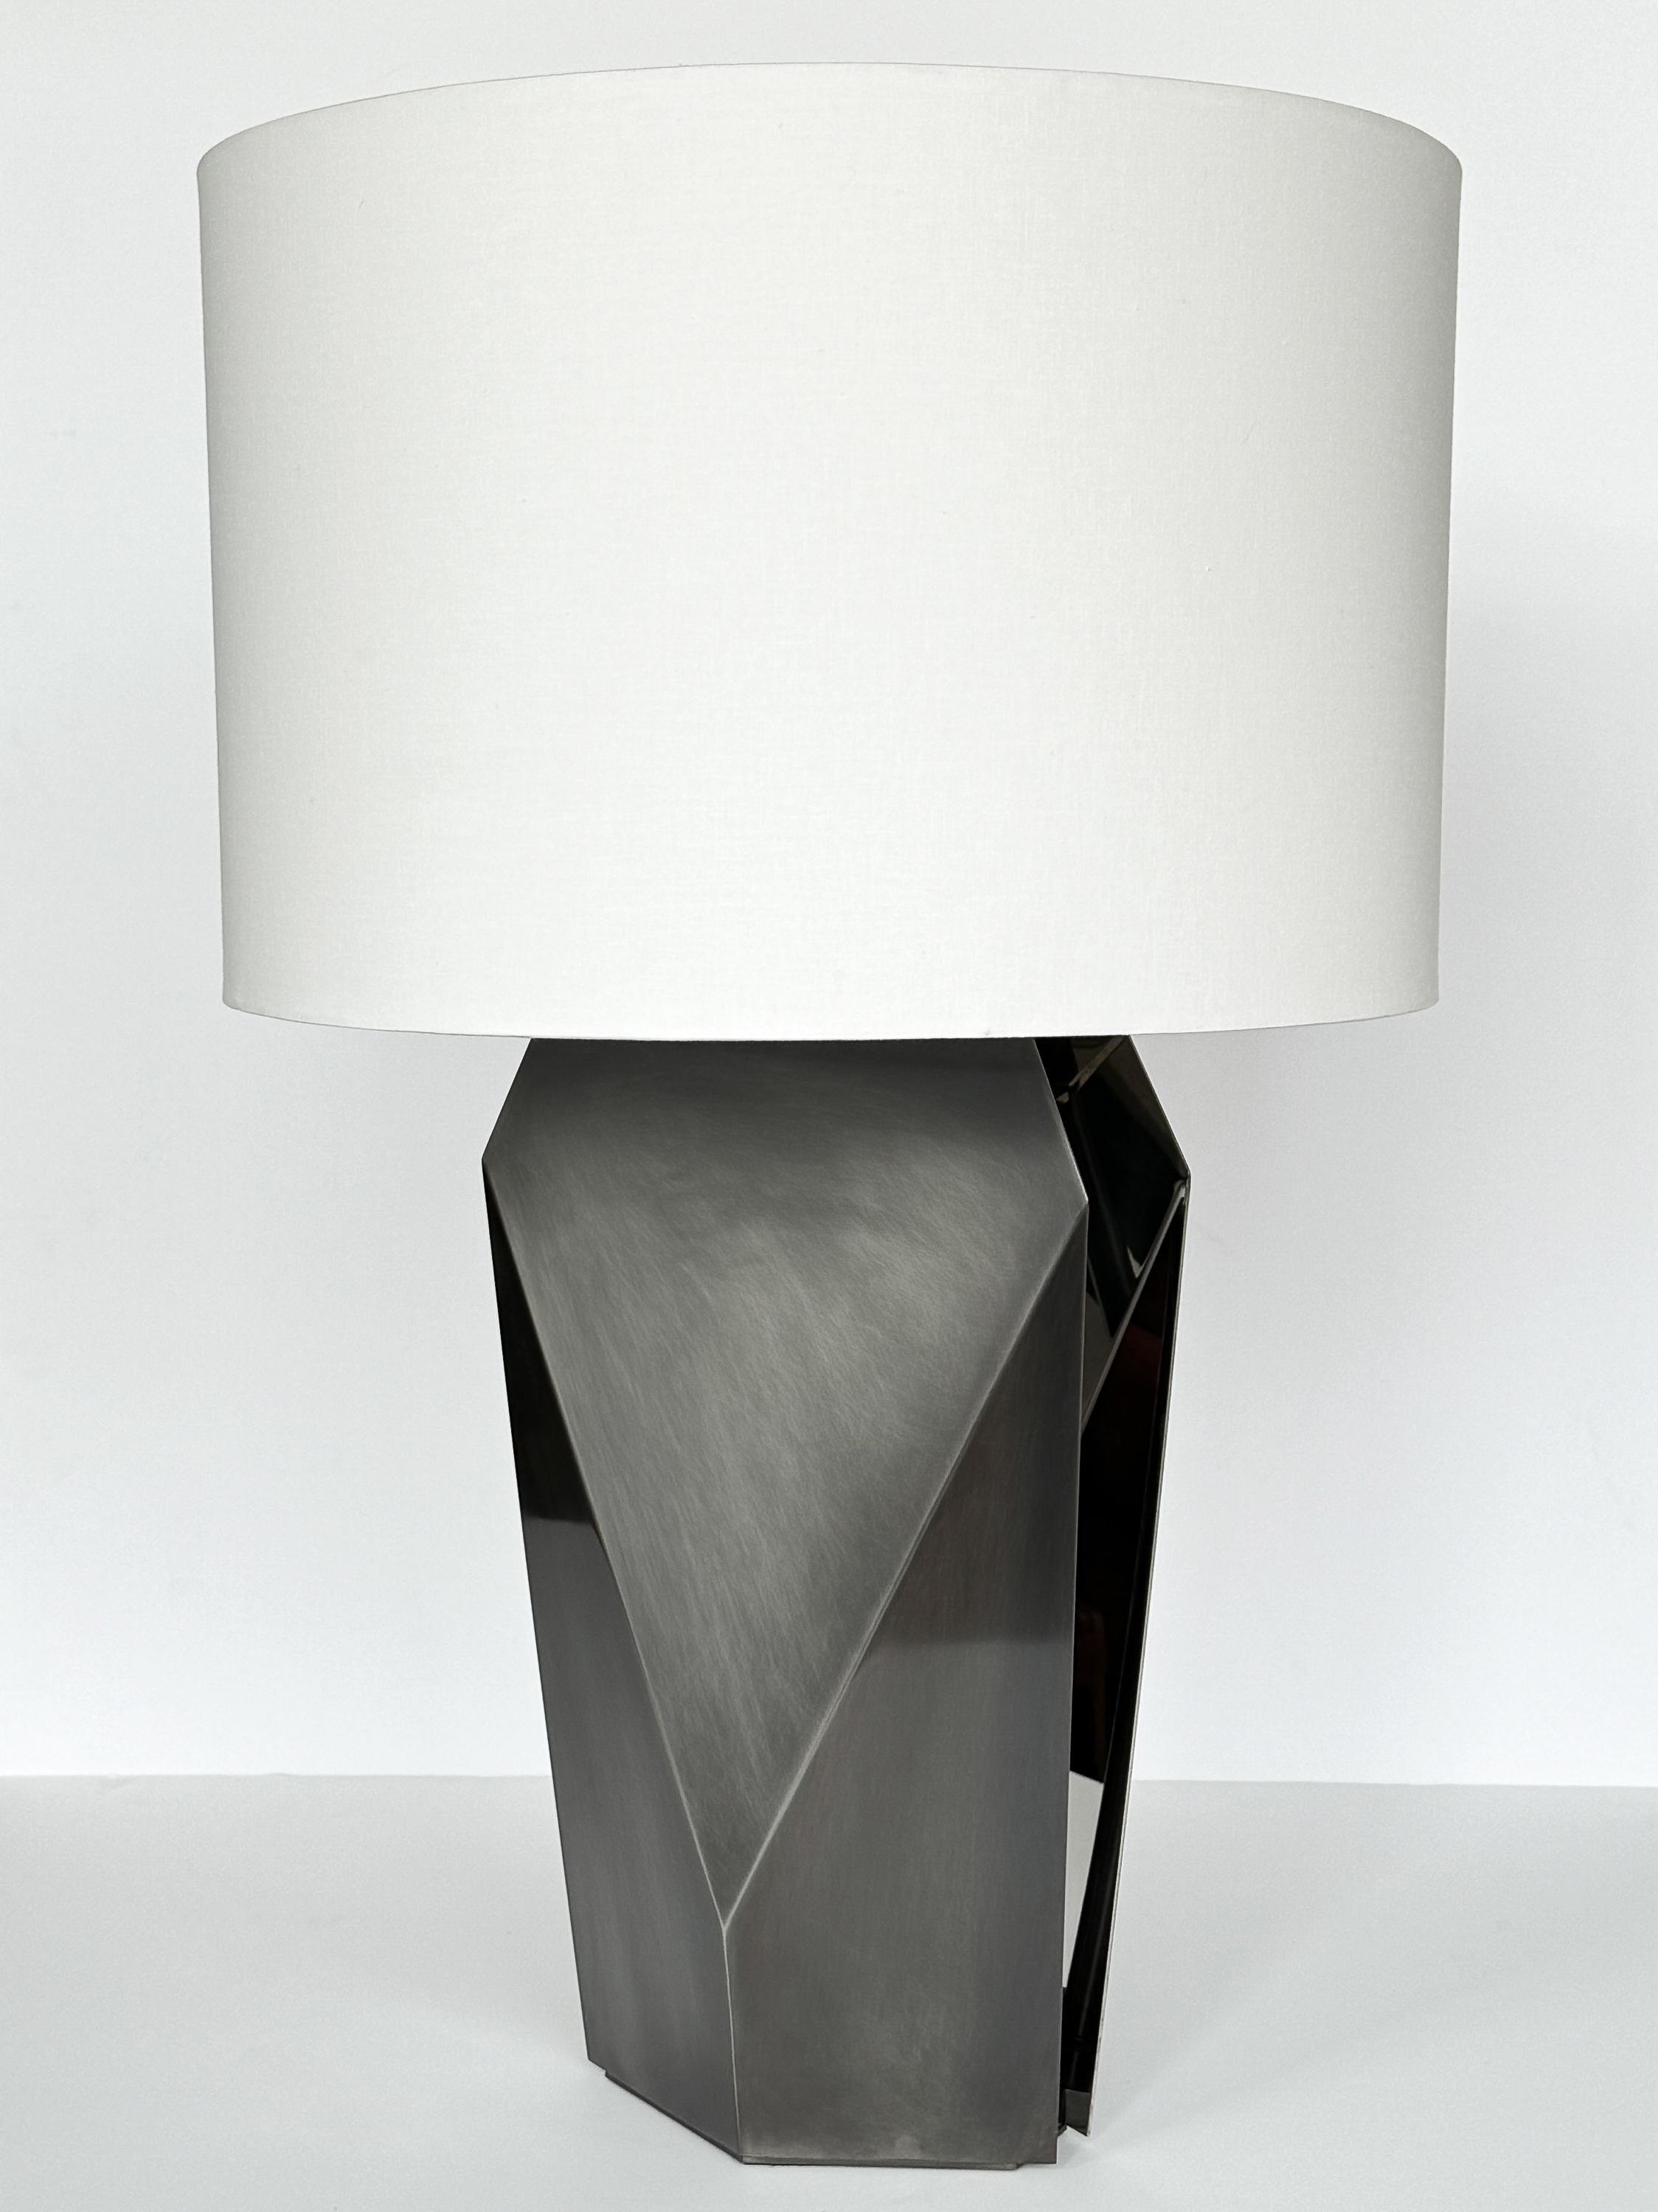 Introducing the Donghia “Origami Temko” table lamp, a contemporary marvel of lighting design hailing from Italy. This lamp pays homage to Florence Temko, a luminary in the art of origami in the United States, capturing the spirit of her work in its